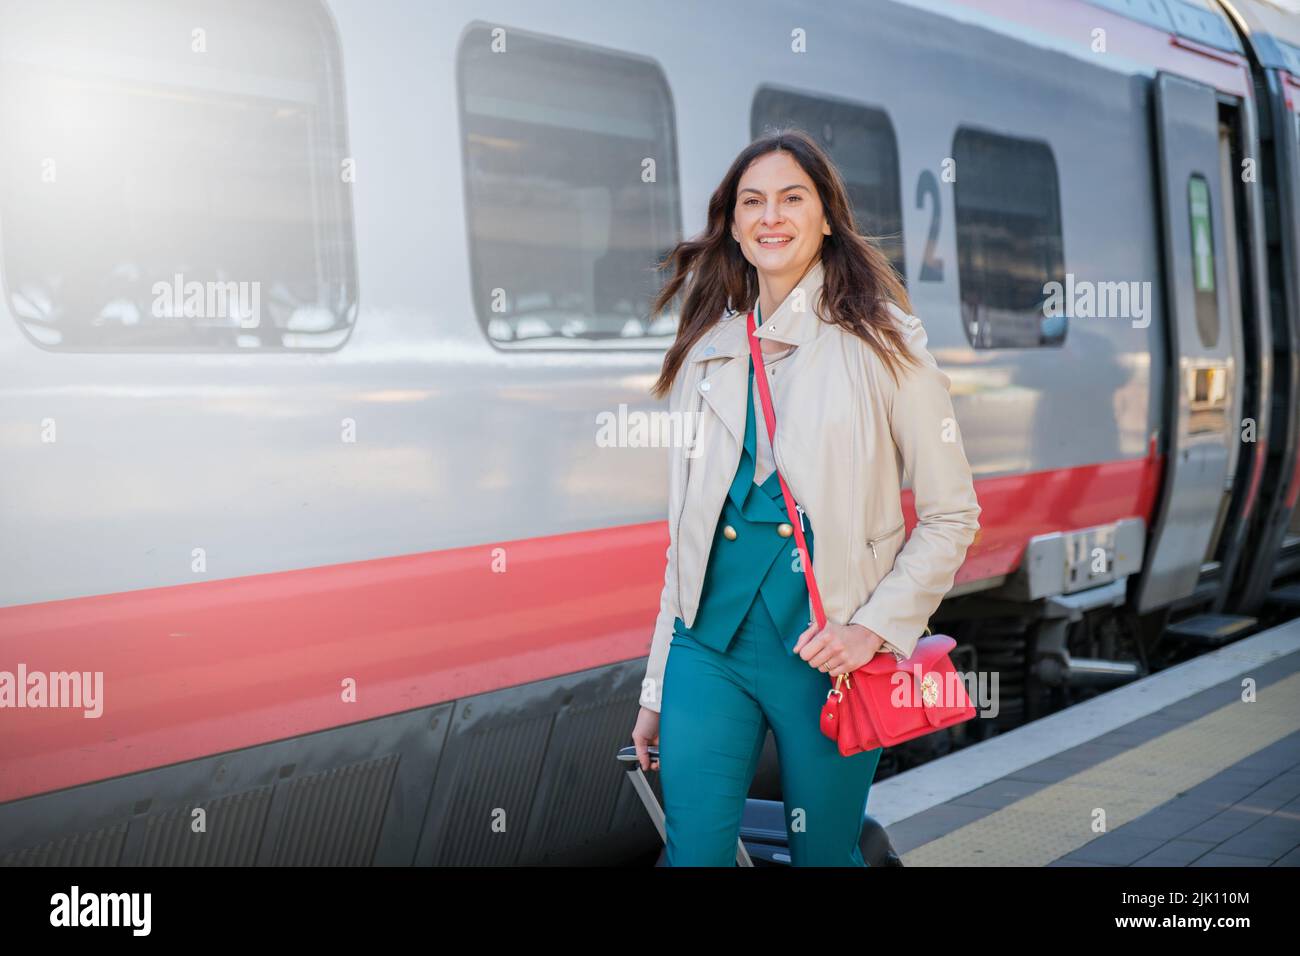 Portrait of a business woman commuter walking in a train station or airport going to boarding gate with hand luggage Stock Photo